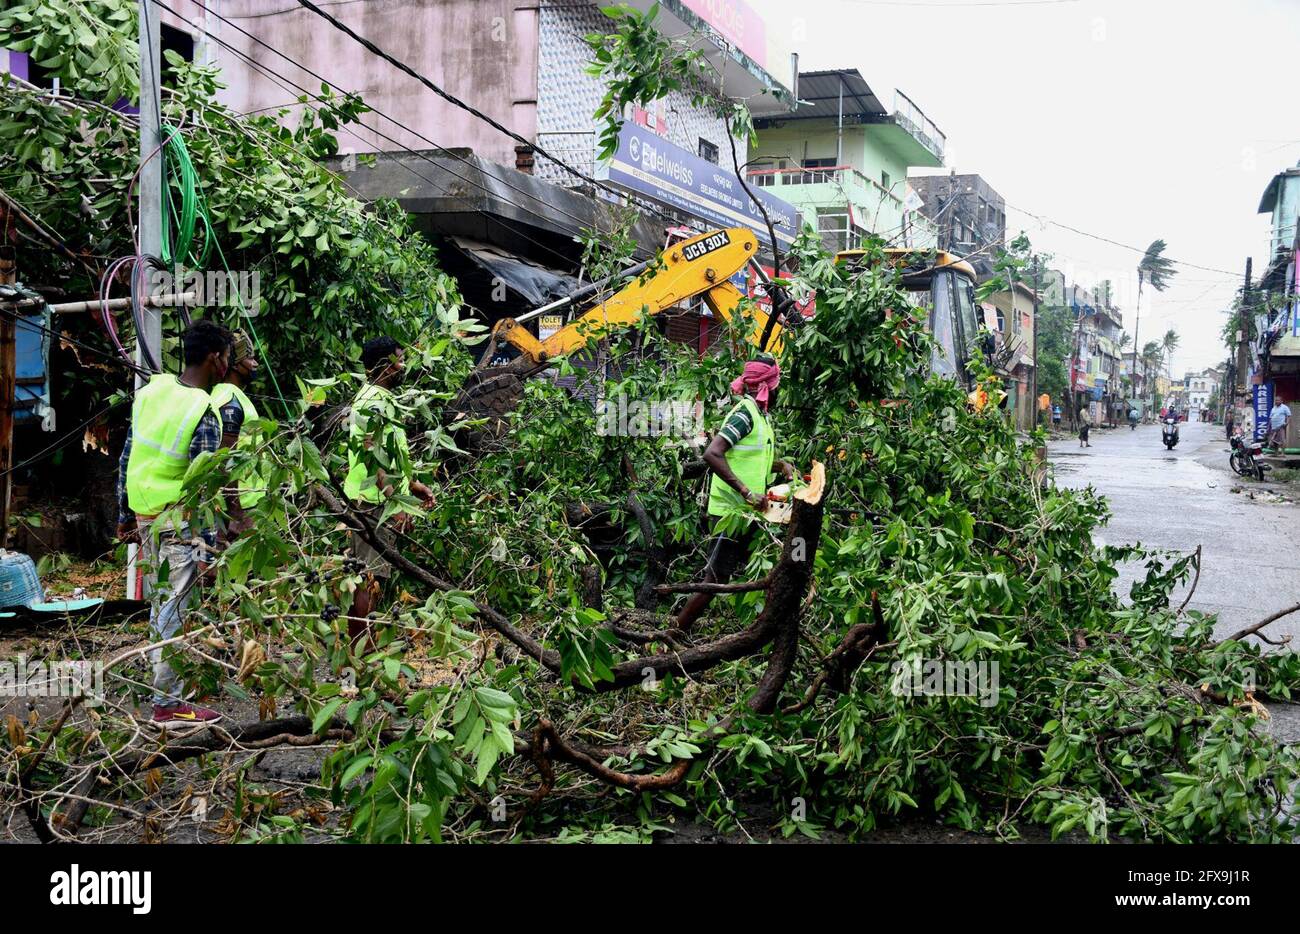 Balasore. 26th May, 2021. Municipal workers remove an uprooted tree from a road after cyclonic storm Yaas hit Balasore district of Odisha on May 26, 2021. Five people were killed on Wednesday after cyclonic storm Yaas hit the coastal area of the eastern Indian states of West Bengal and Odisha, local media reported. Credit: Str/Xinhua/Alamy Live News Stock Photo